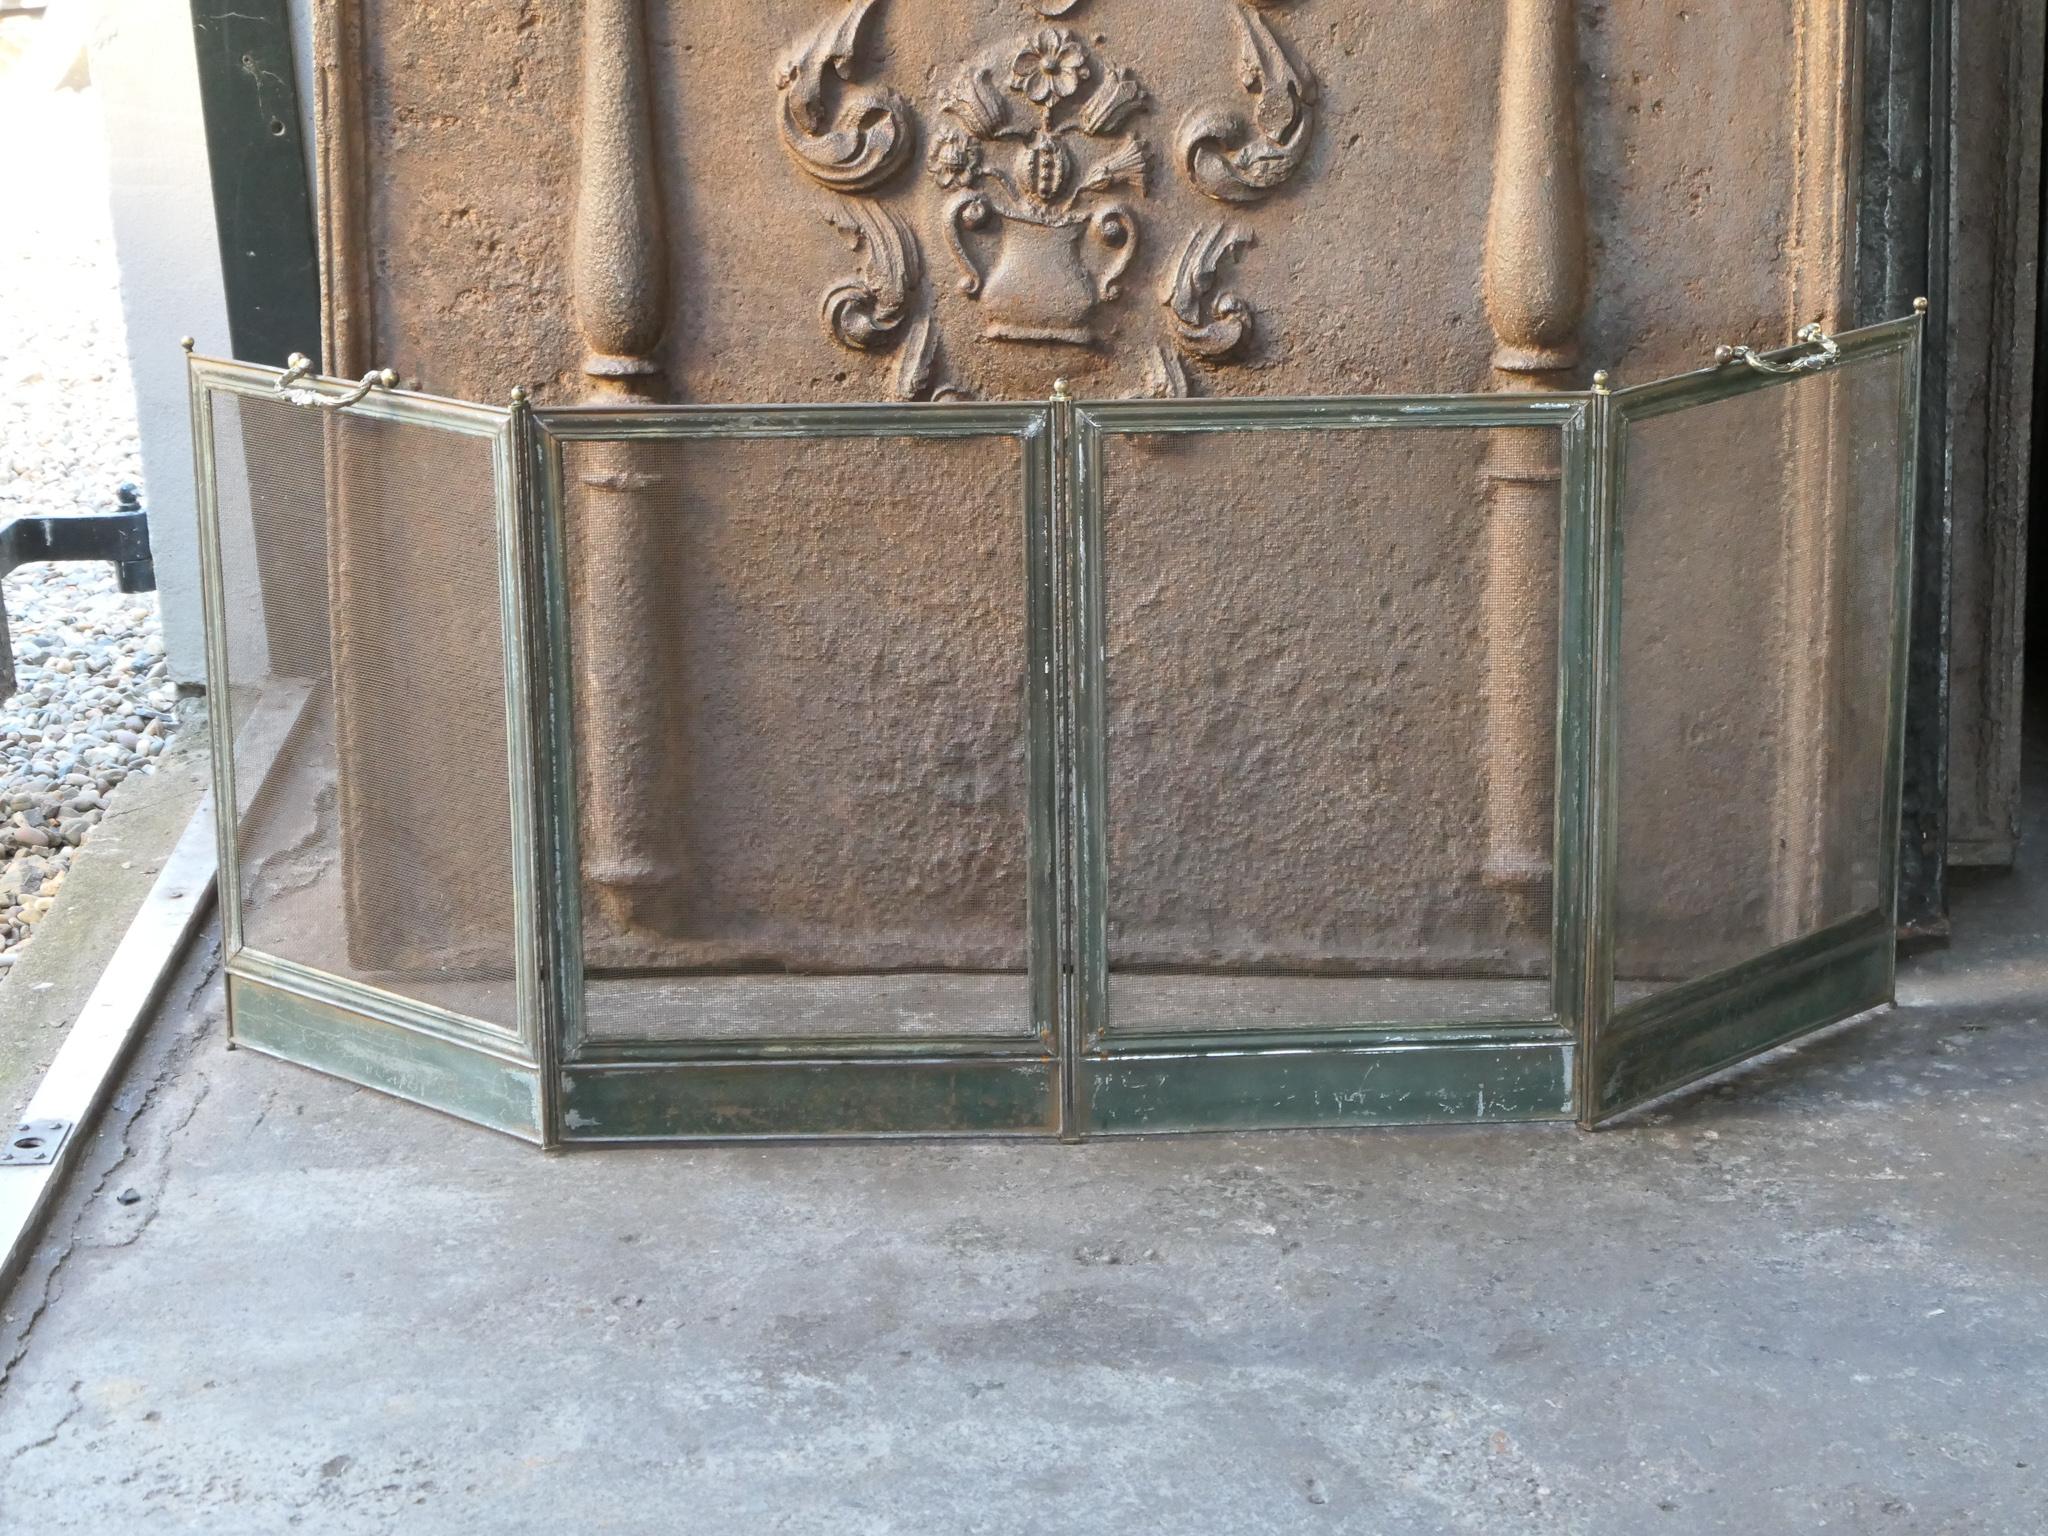 Brass Antique French Napoleon III Fireplace Screen or Fire Screen, 19th - 20th Century For Sale